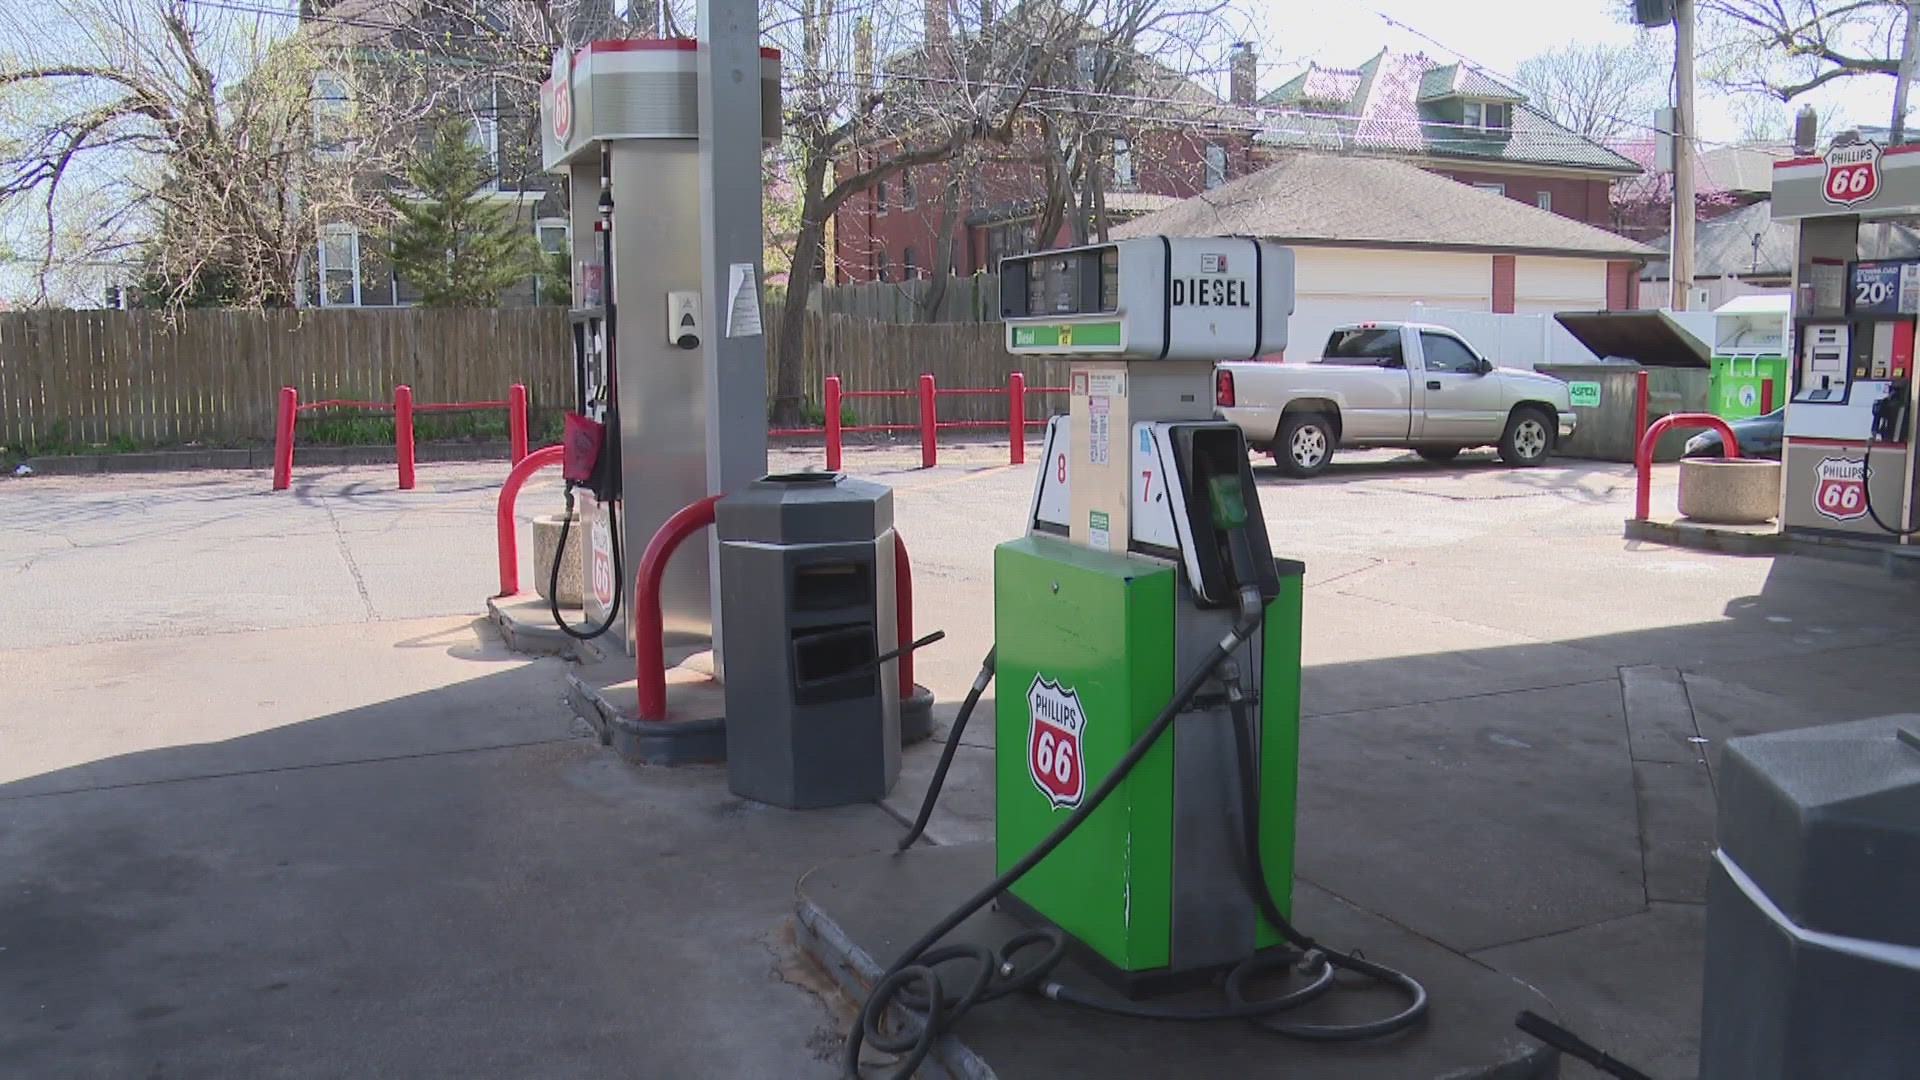 According to police, it happened just before 8:30 Saturday night. Five suspects in two vehicles robbed and kidnapped a young man at the Phillips 66.